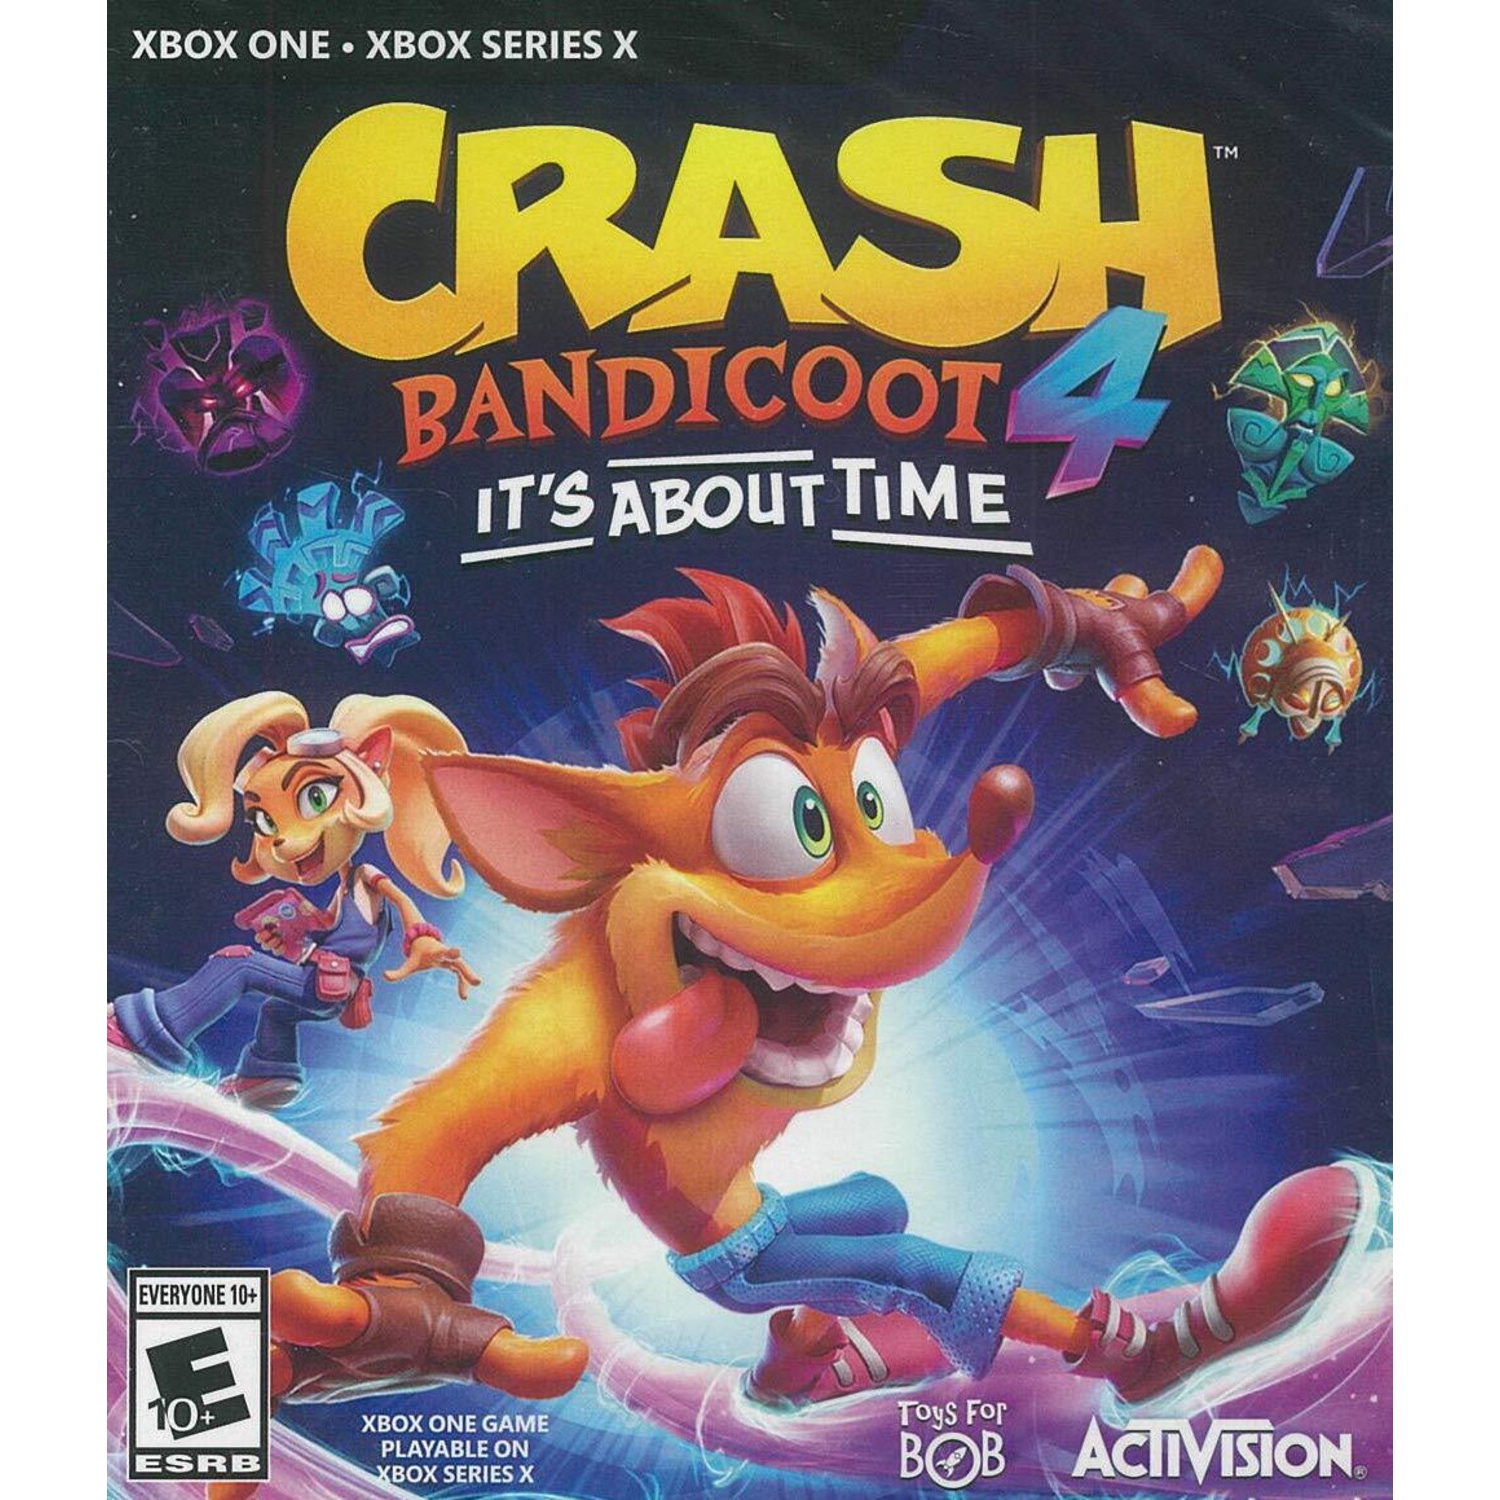 Crash Bandicoot 4: It's About Time for Xbox One [VIDEOGAMES]